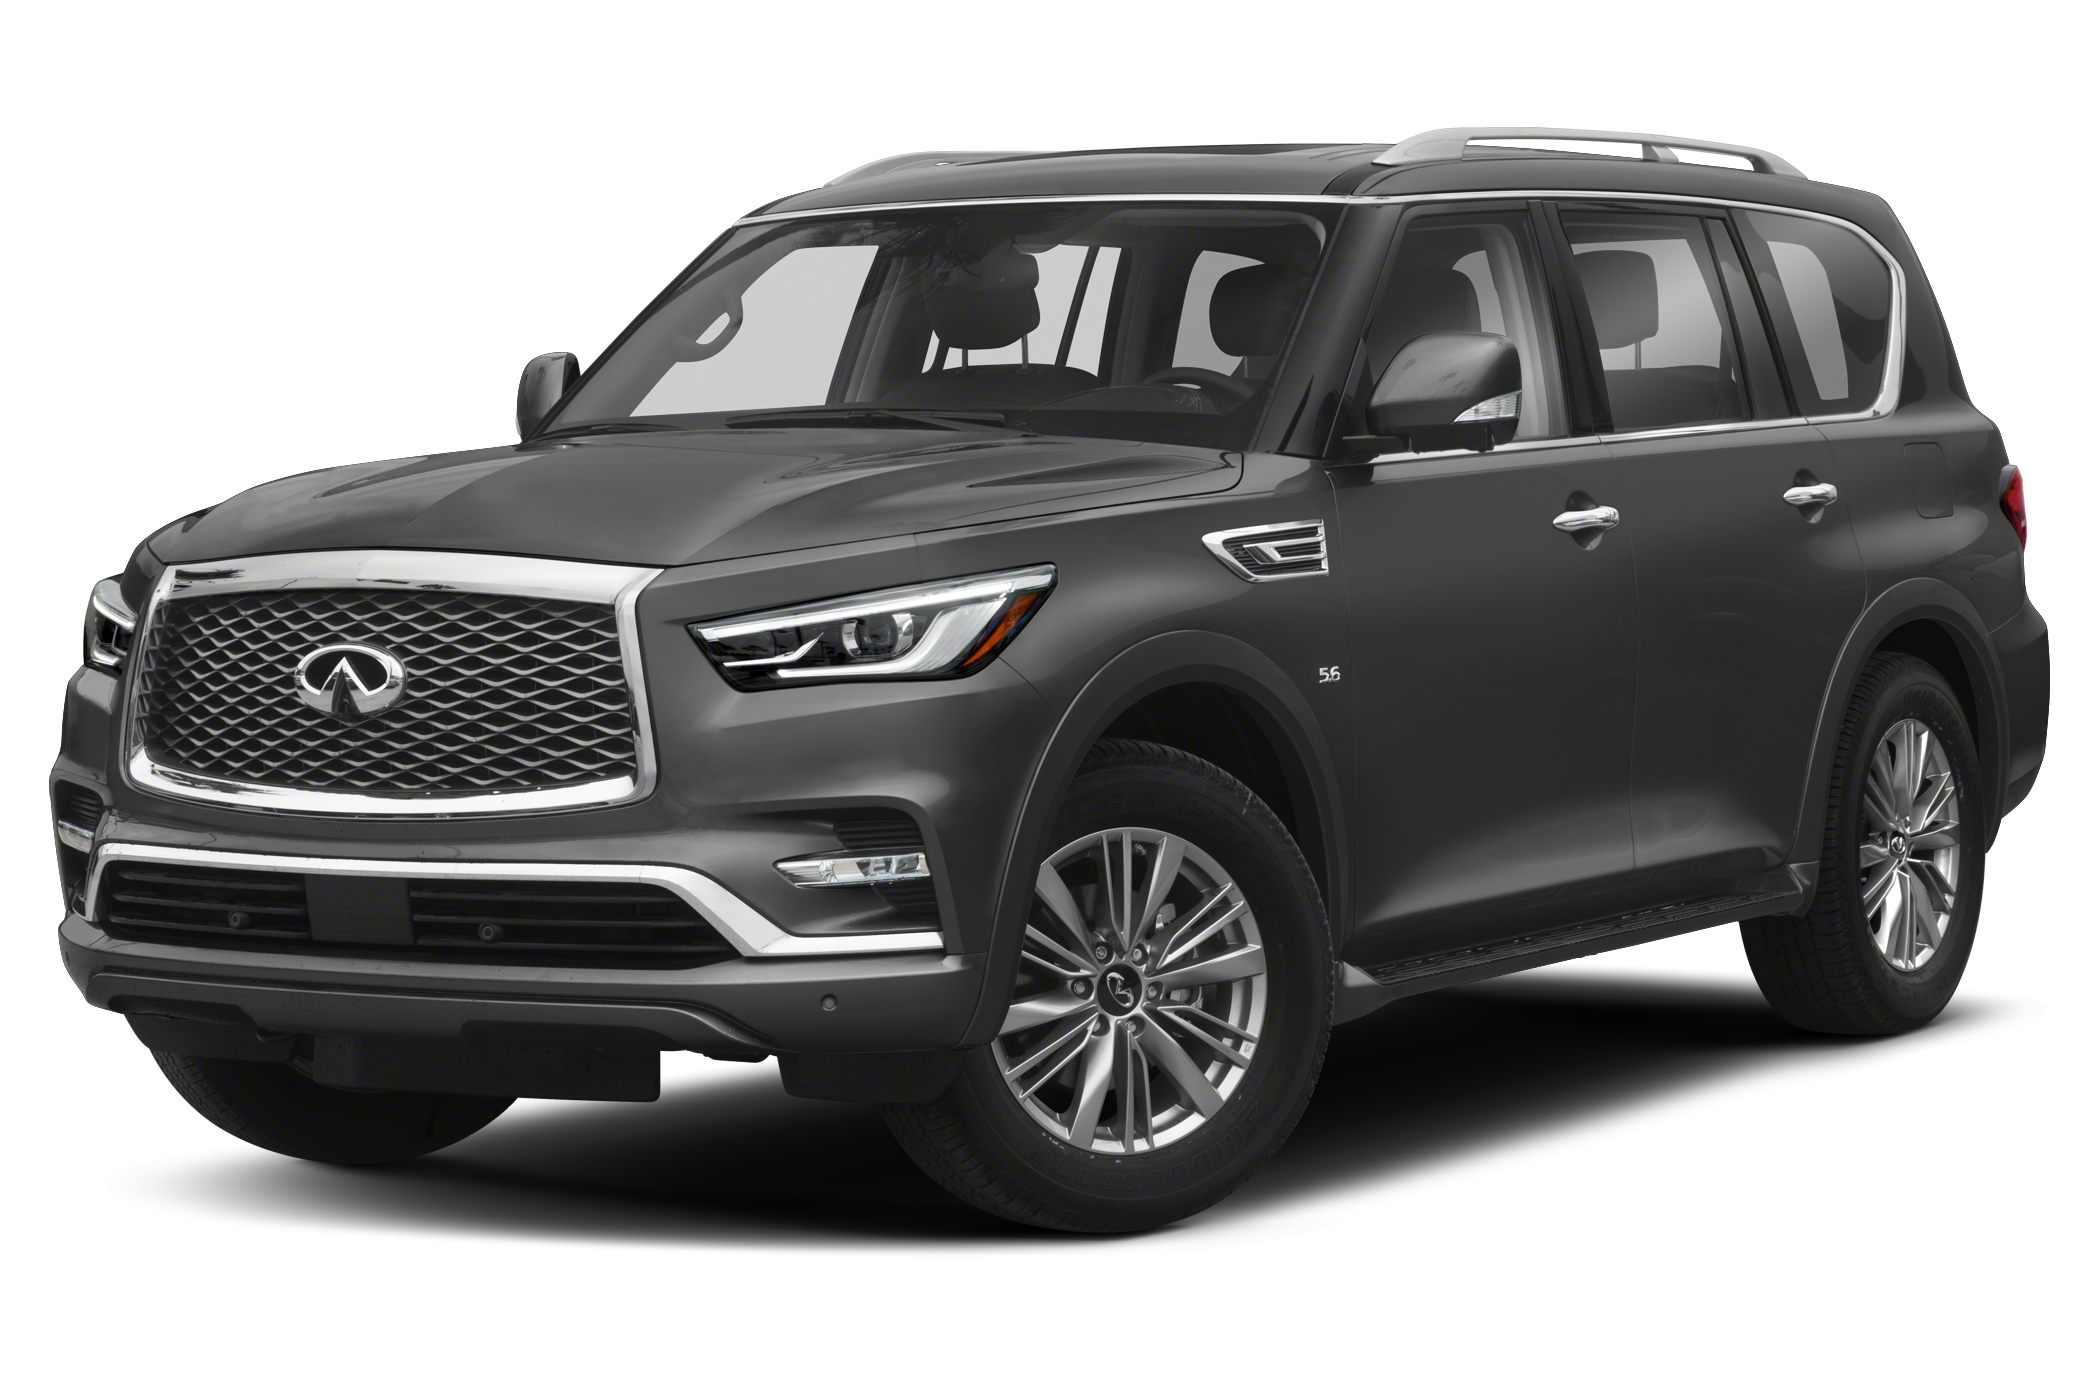 2019 Infiniti Qx80 Luxe 4dr All Wheel Drive Pictures